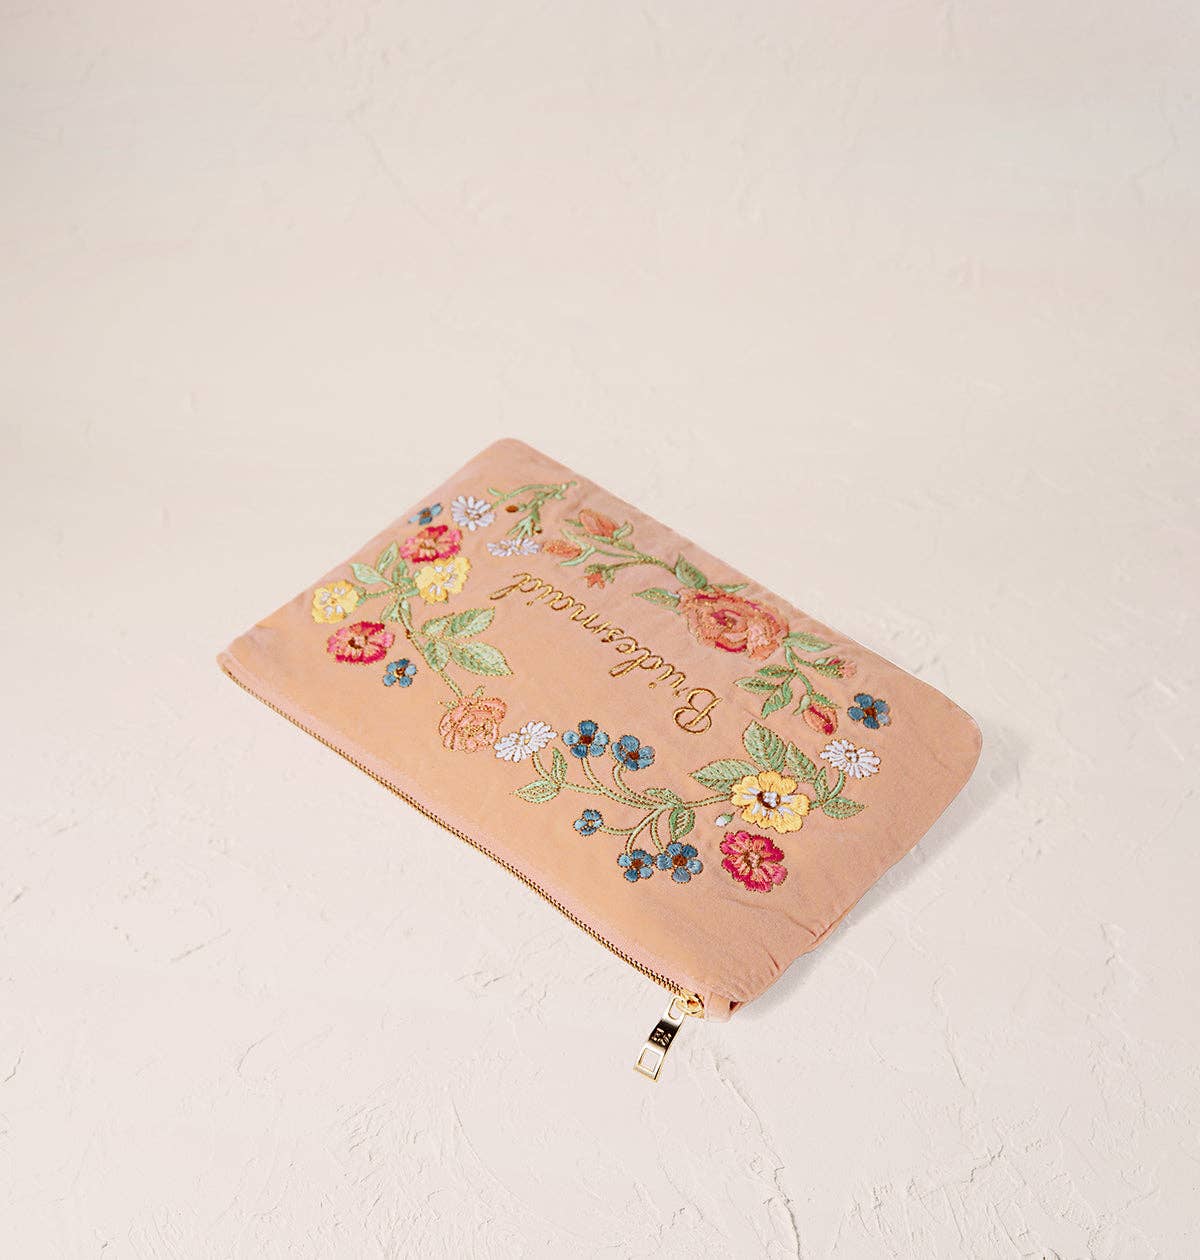 Floral Bridesmaid Everyday Pouch